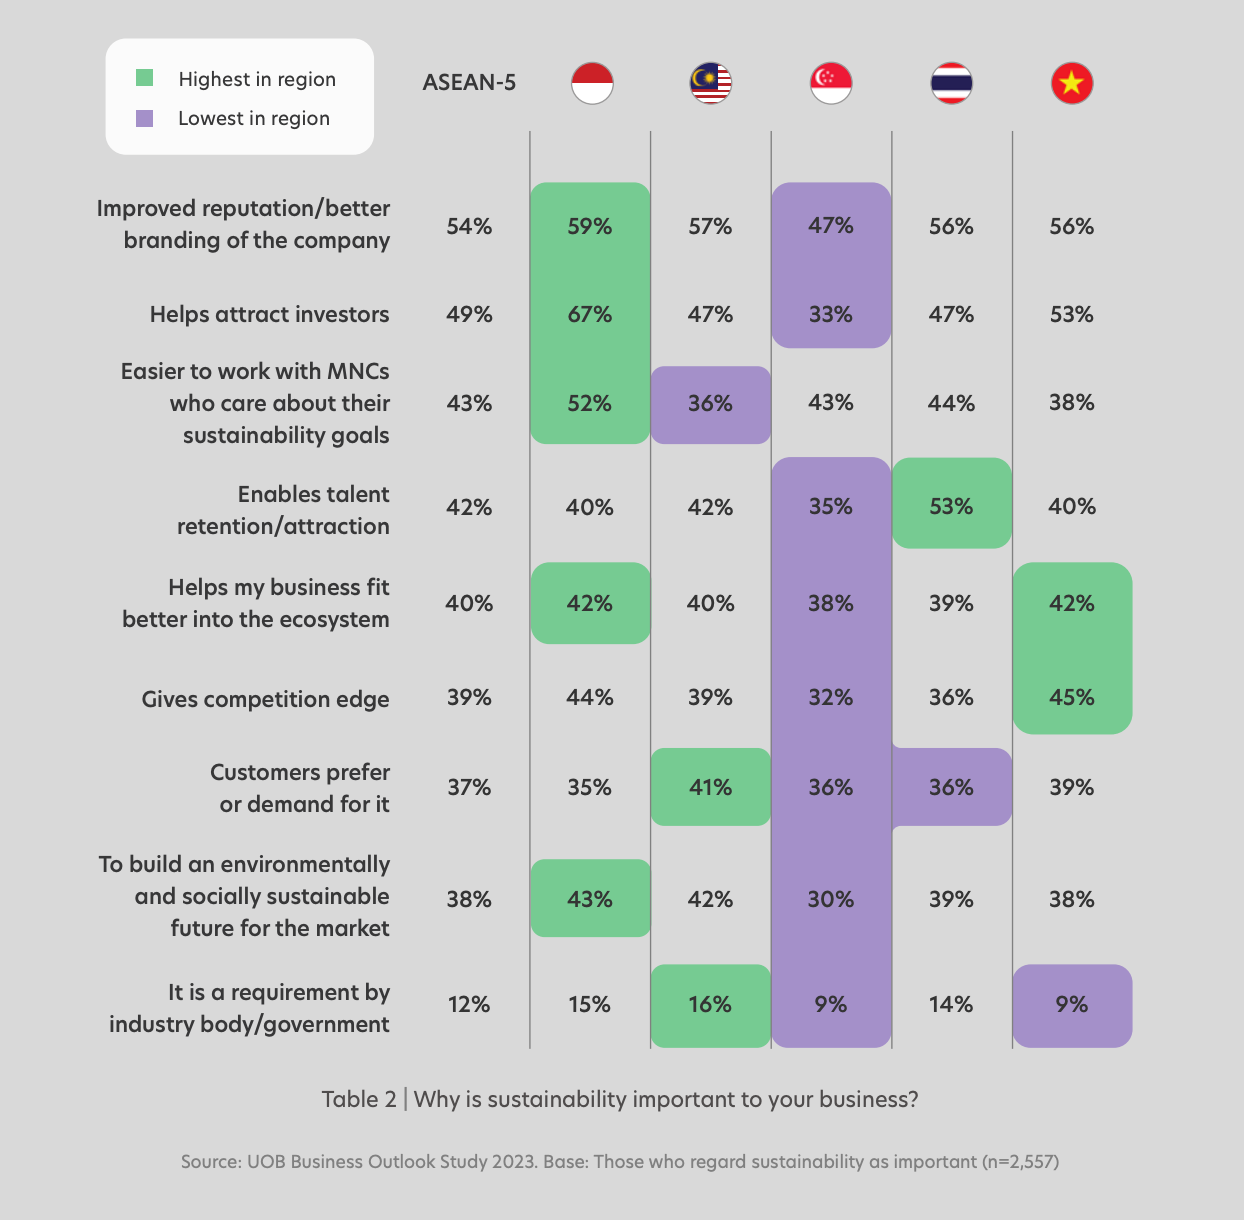 drivers-of-sustainability-adoption-source-uob-business-outlook-study-2023-sme-and-large-enterprises-may-2023.png